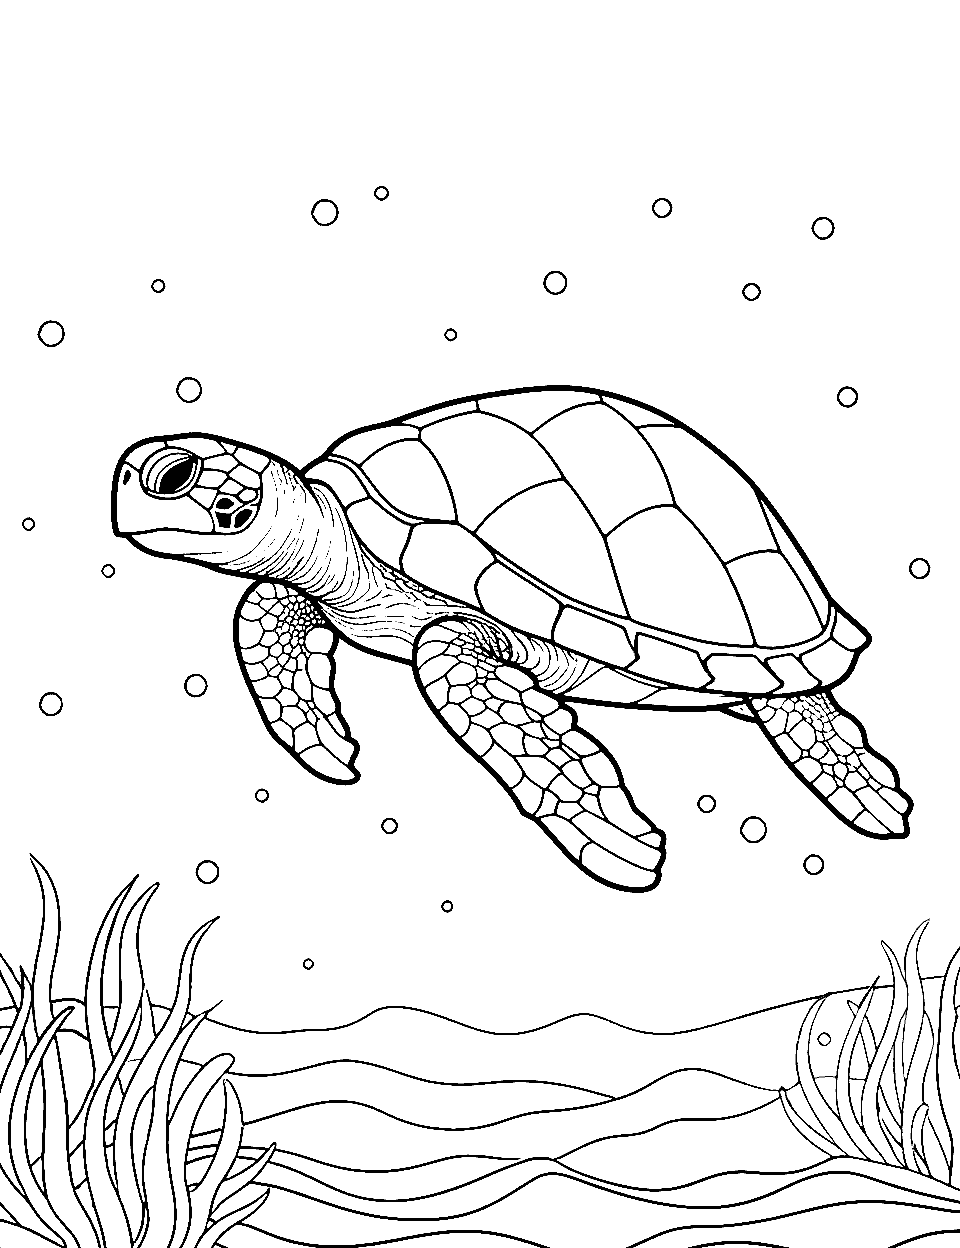 Ocean's Gentle Giant Turtle Coloring Page - A loggerhead turtle swimming close to the ocean floor.